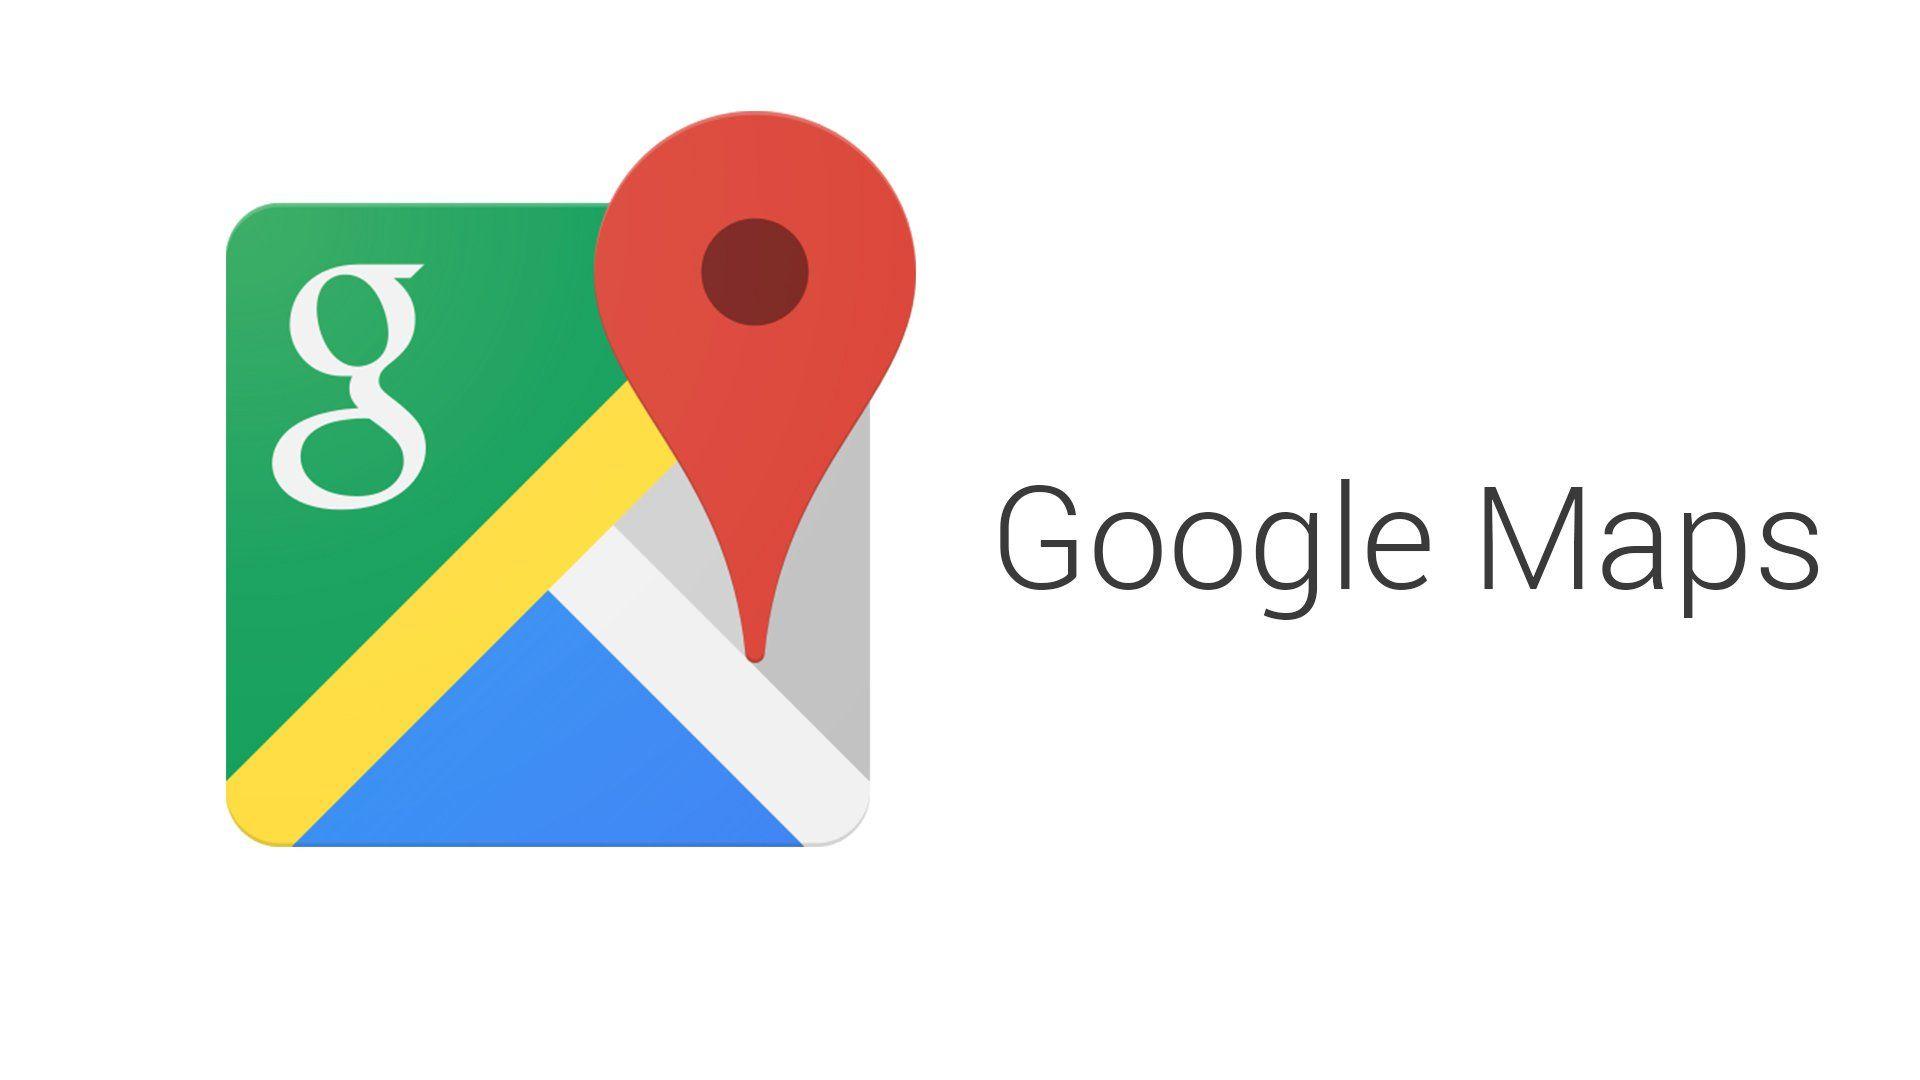 Places Logo - Google Maps Gets Favorite Places Lists and Sharing Options